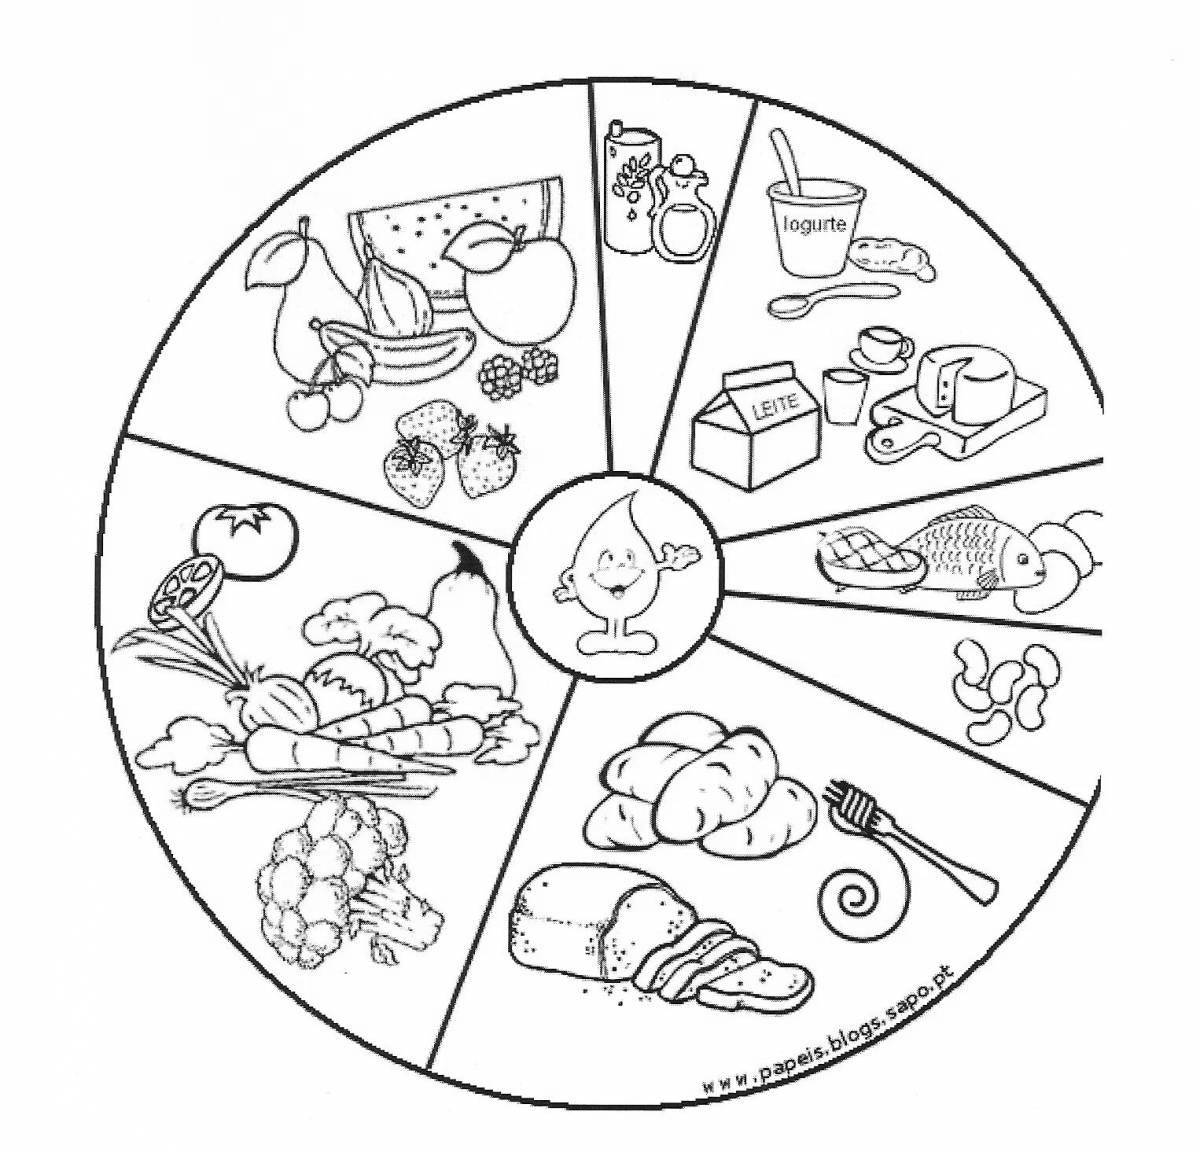 Coloring book about food for children 6-7 years old